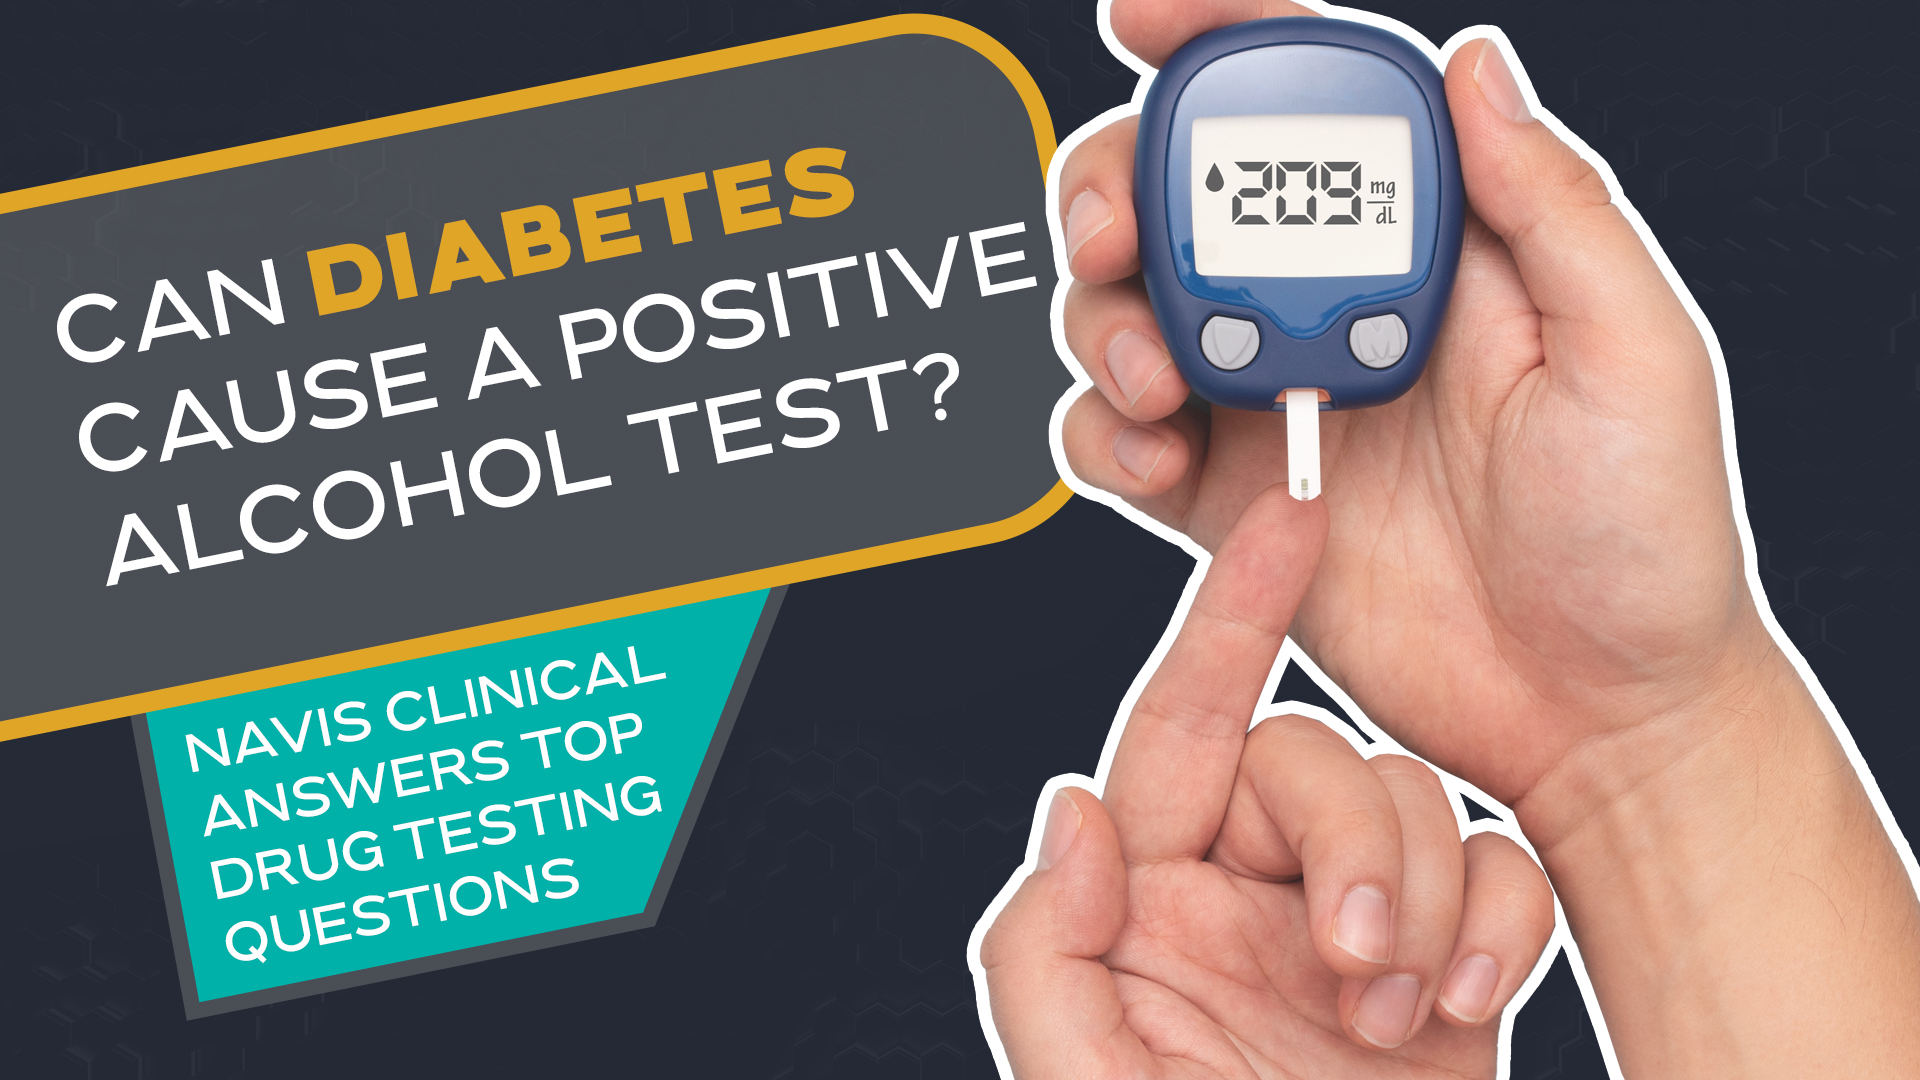 Diabetes test showing a high level.